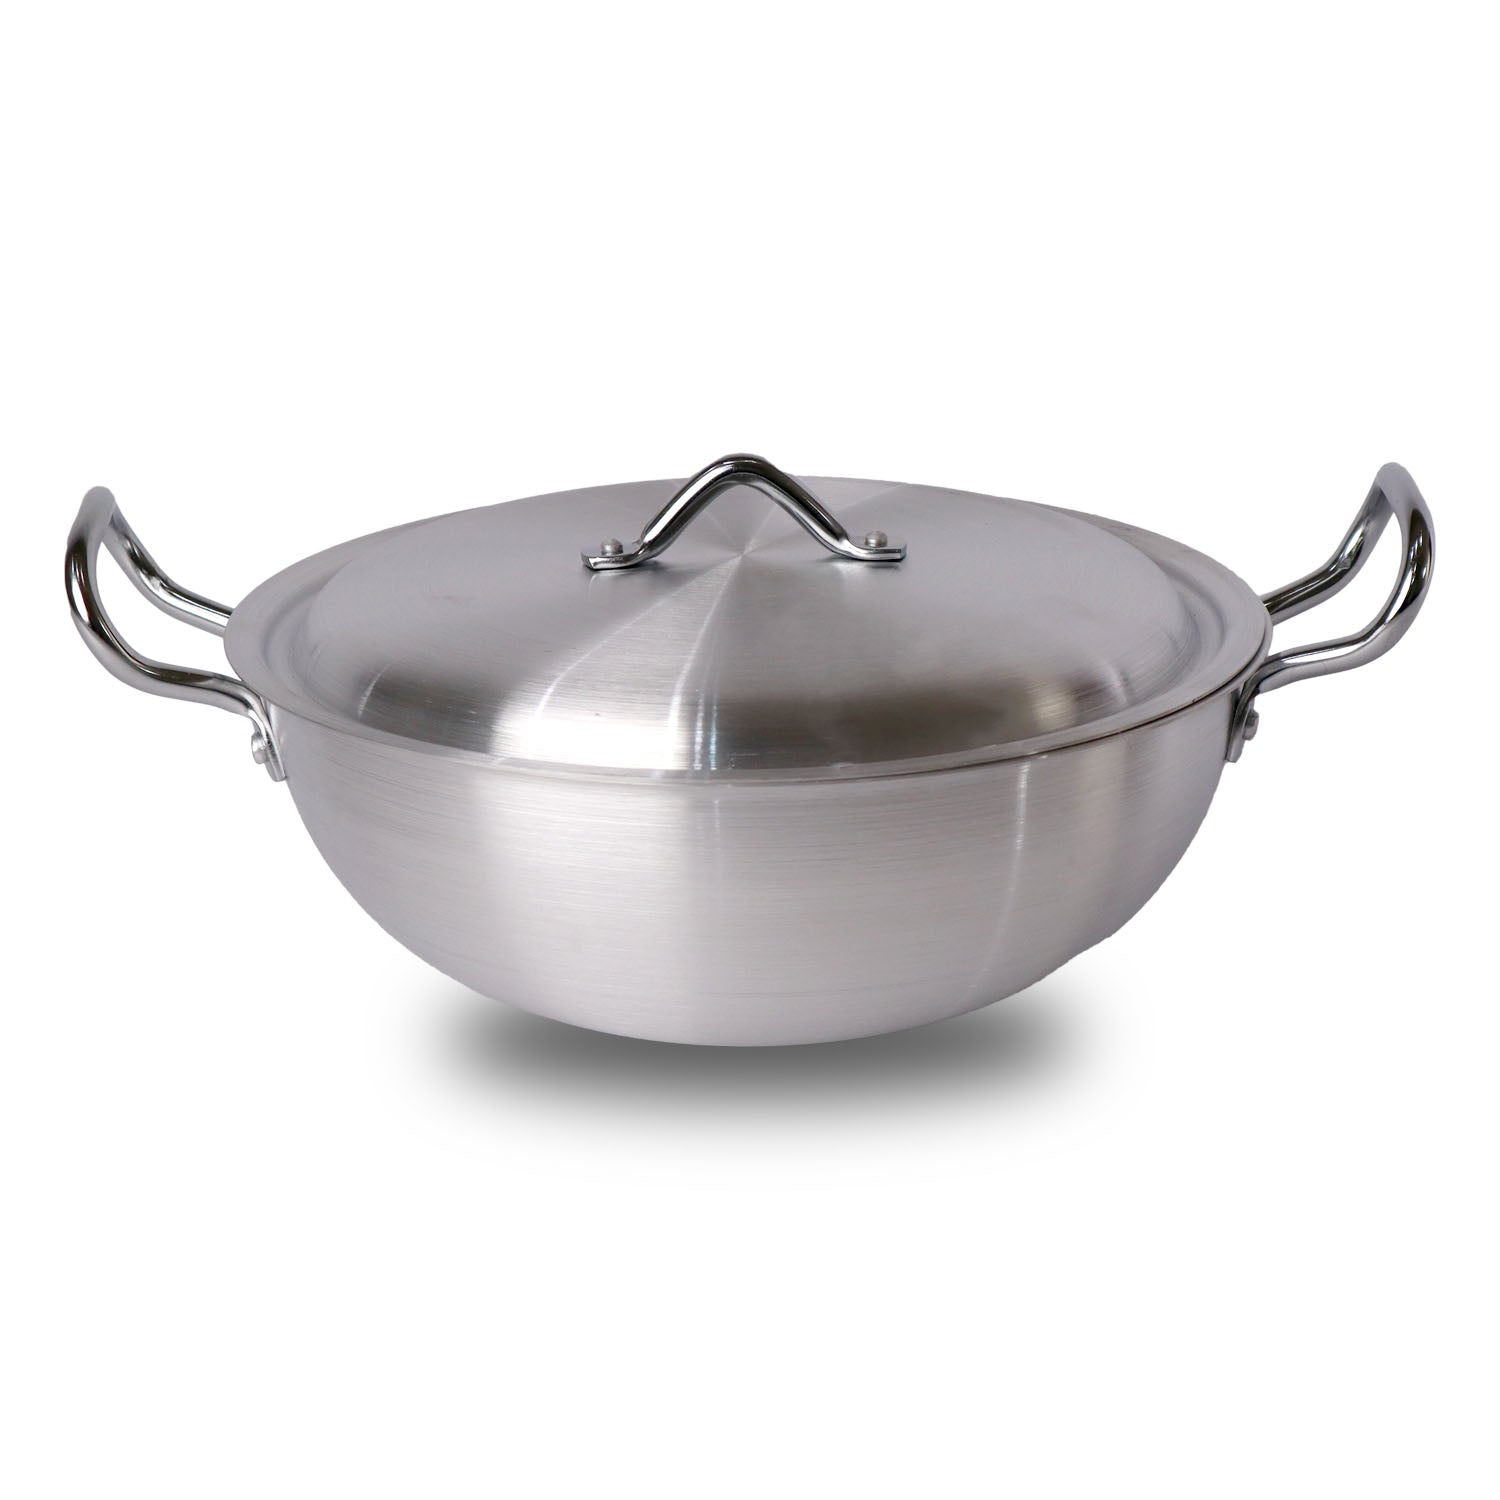 Buy Chef Best Quality Metal Finish Karahi / Cooking Pan 30 cm / chef rida aftab prefer majestic chef cookware brand for cookware